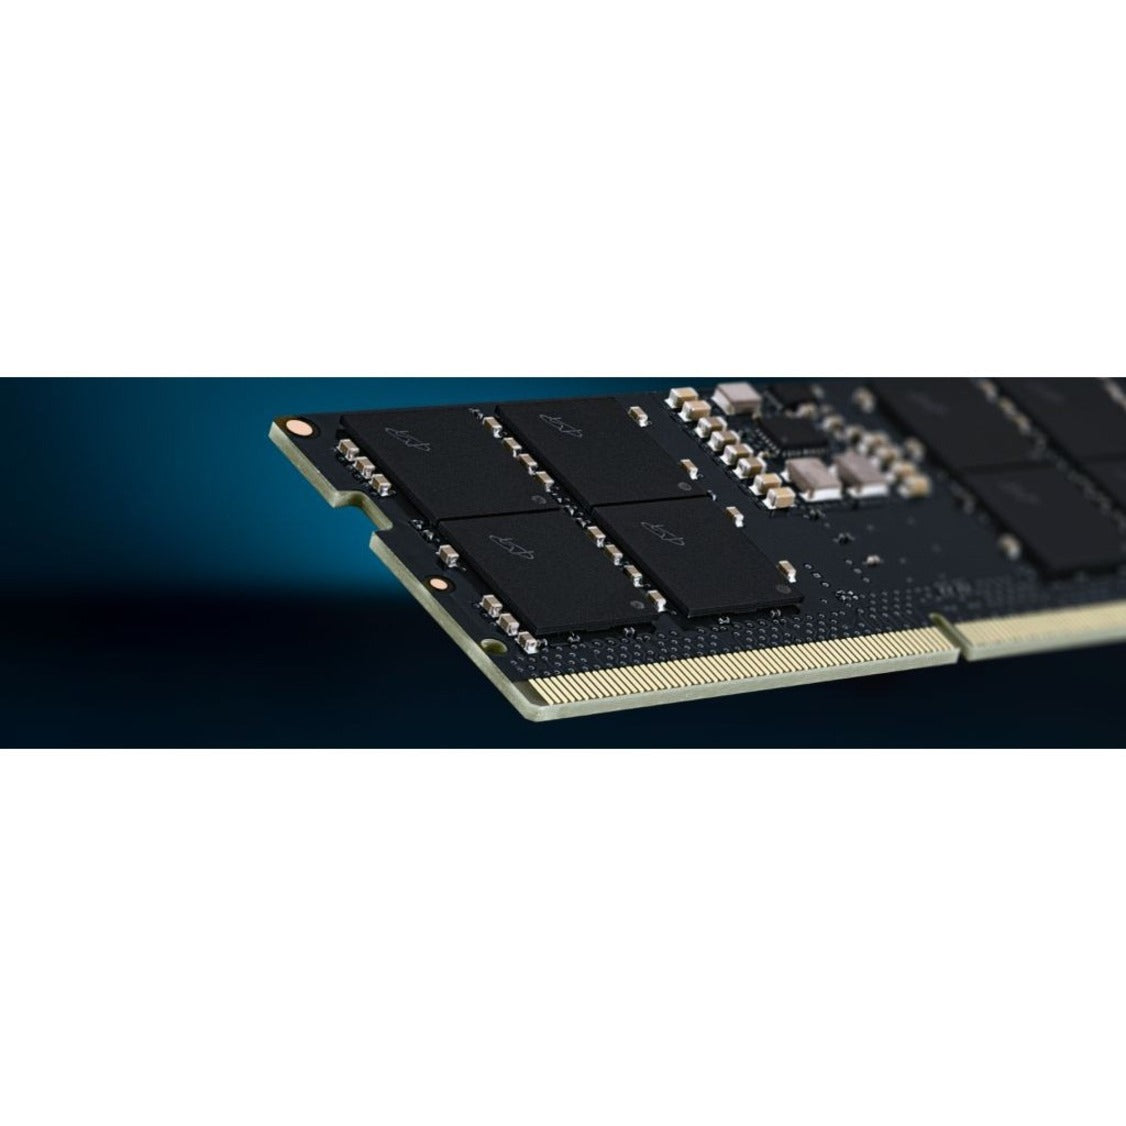 Crucial CT8G48C40S5 8GB DDR5 SDRAM Memory Module, High-Speed RAM for Improved Performance